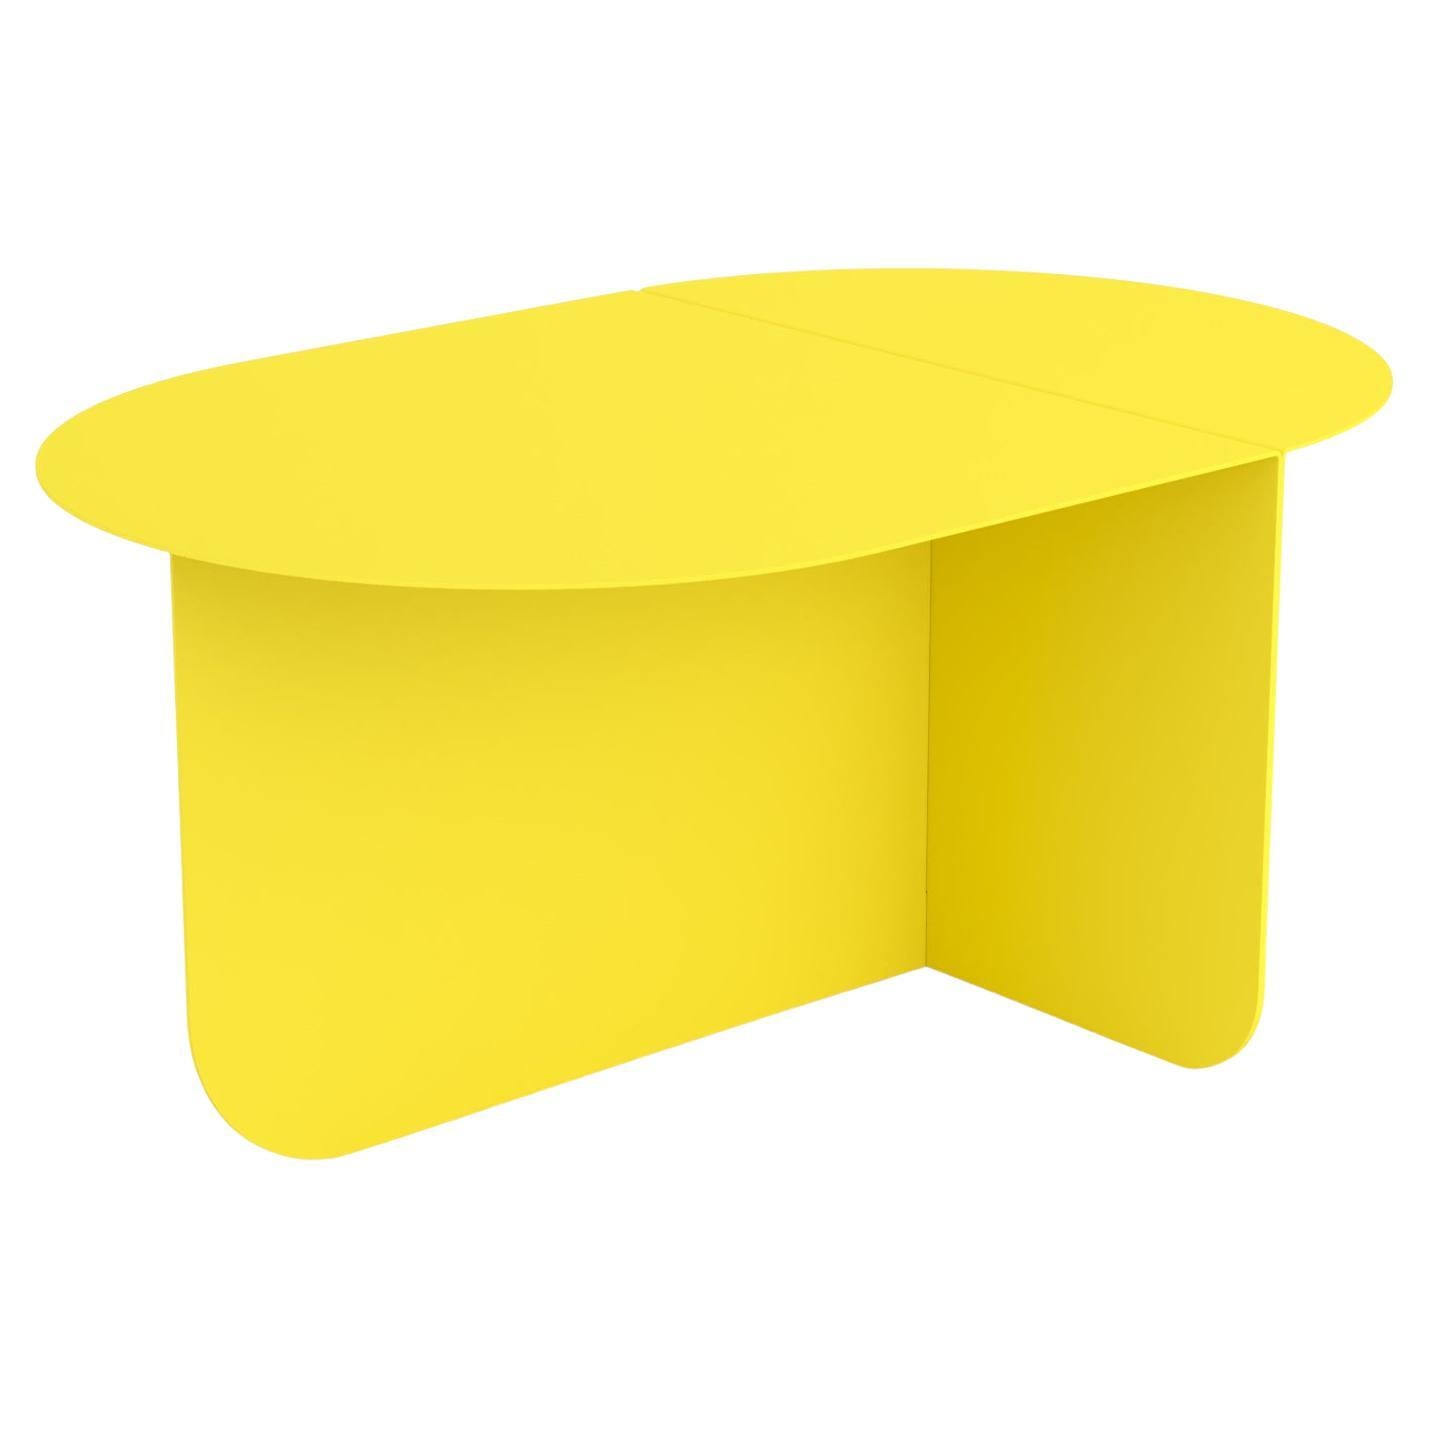 Colour, a Modern Oval Coffee Table, Ral 1016 - Sulfur Yellow, by Bas Vellekoop